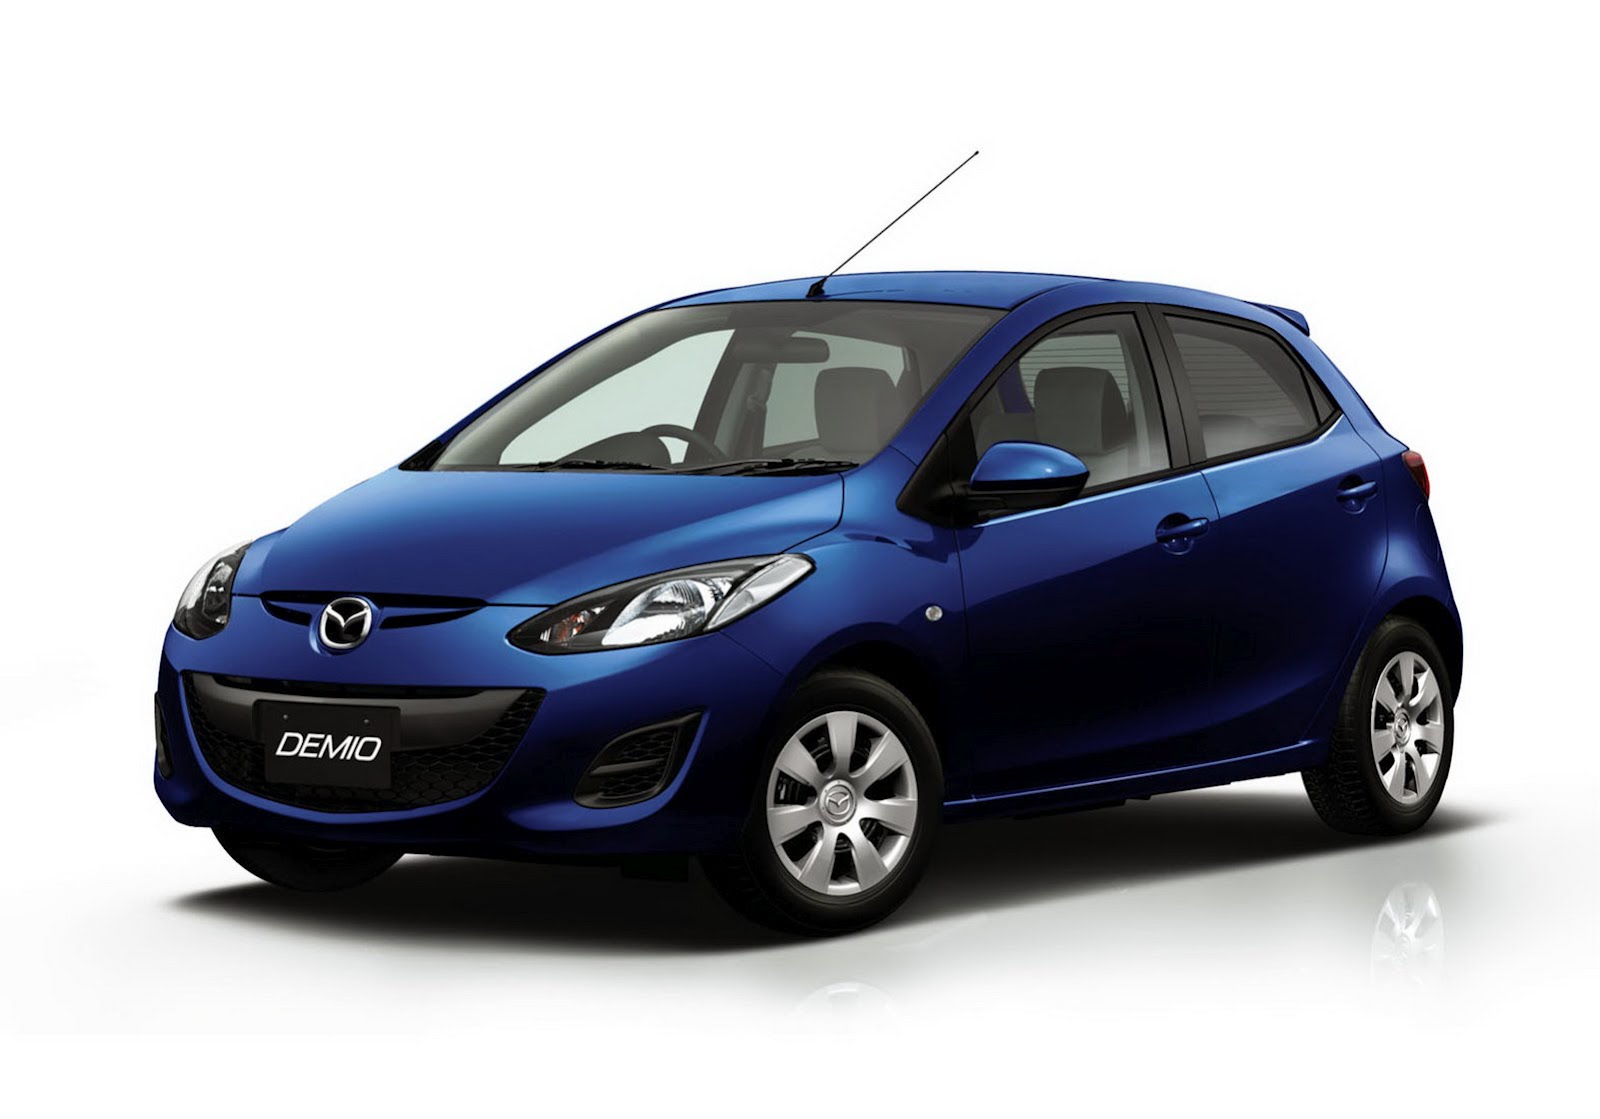 mazda-rolls-out-more-fuel-efficient-demio-13c-v-smart-edition-ii-in